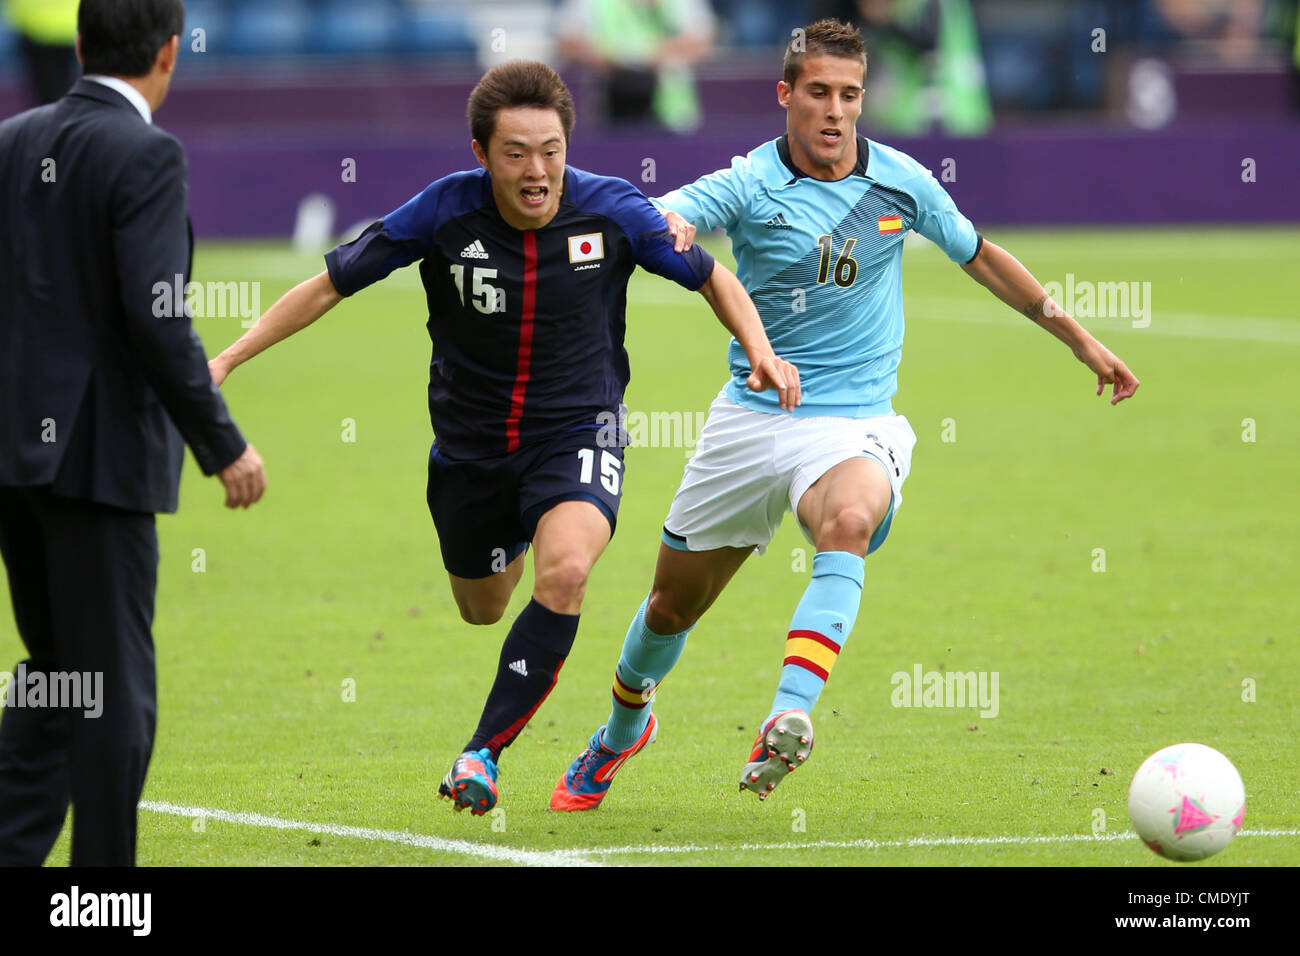 Manabu Saito (JPN), Cristian Tello (ESP), JULY 26, 2012 - Football / Soccer : Men's First Round Group D match between Spain 0-1 Japan at Hampden Park during the London 2012 Olympic Games in Glasgow, UK. (Photo by AFLO) Stock Photo